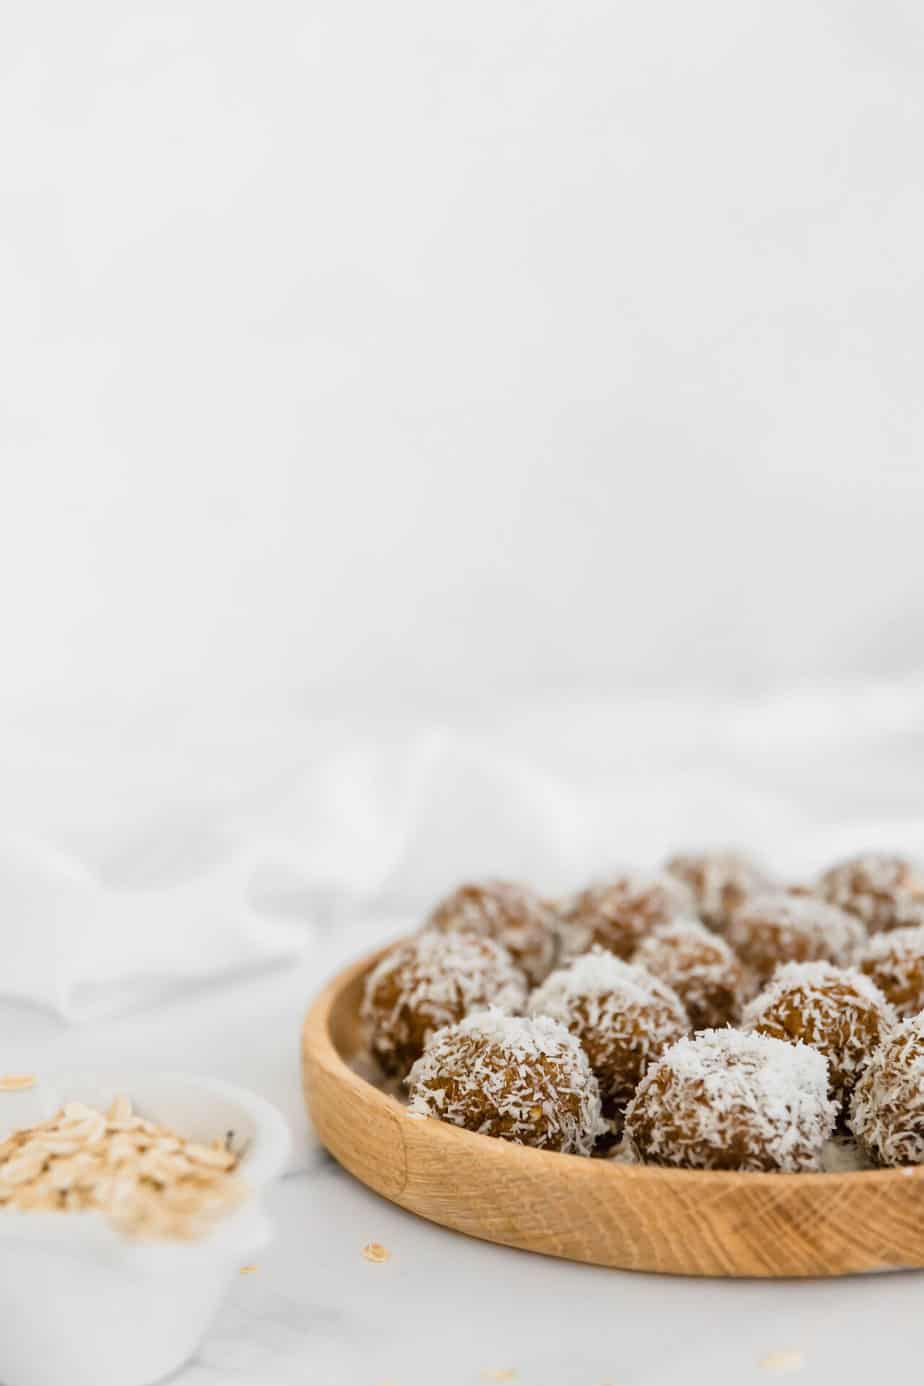 A wooden plate filled with healthy bliss balls coated in coconut.